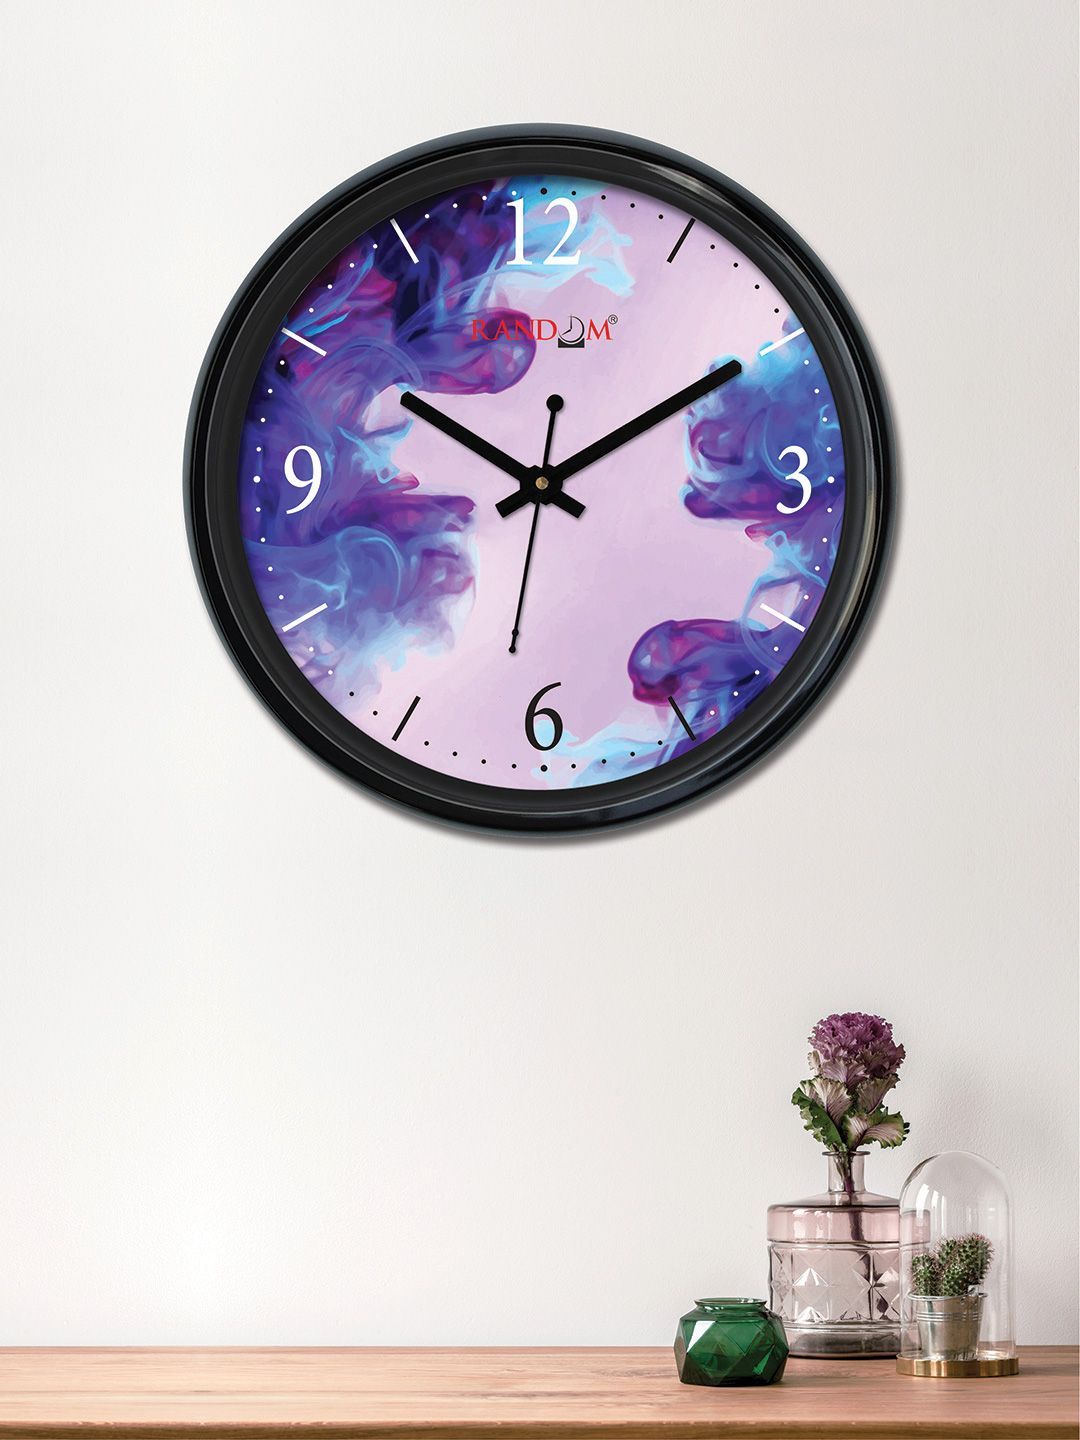 RANDOM Lavender & Blue Round Printed 30 cm Analogue Wall Clock Price in India